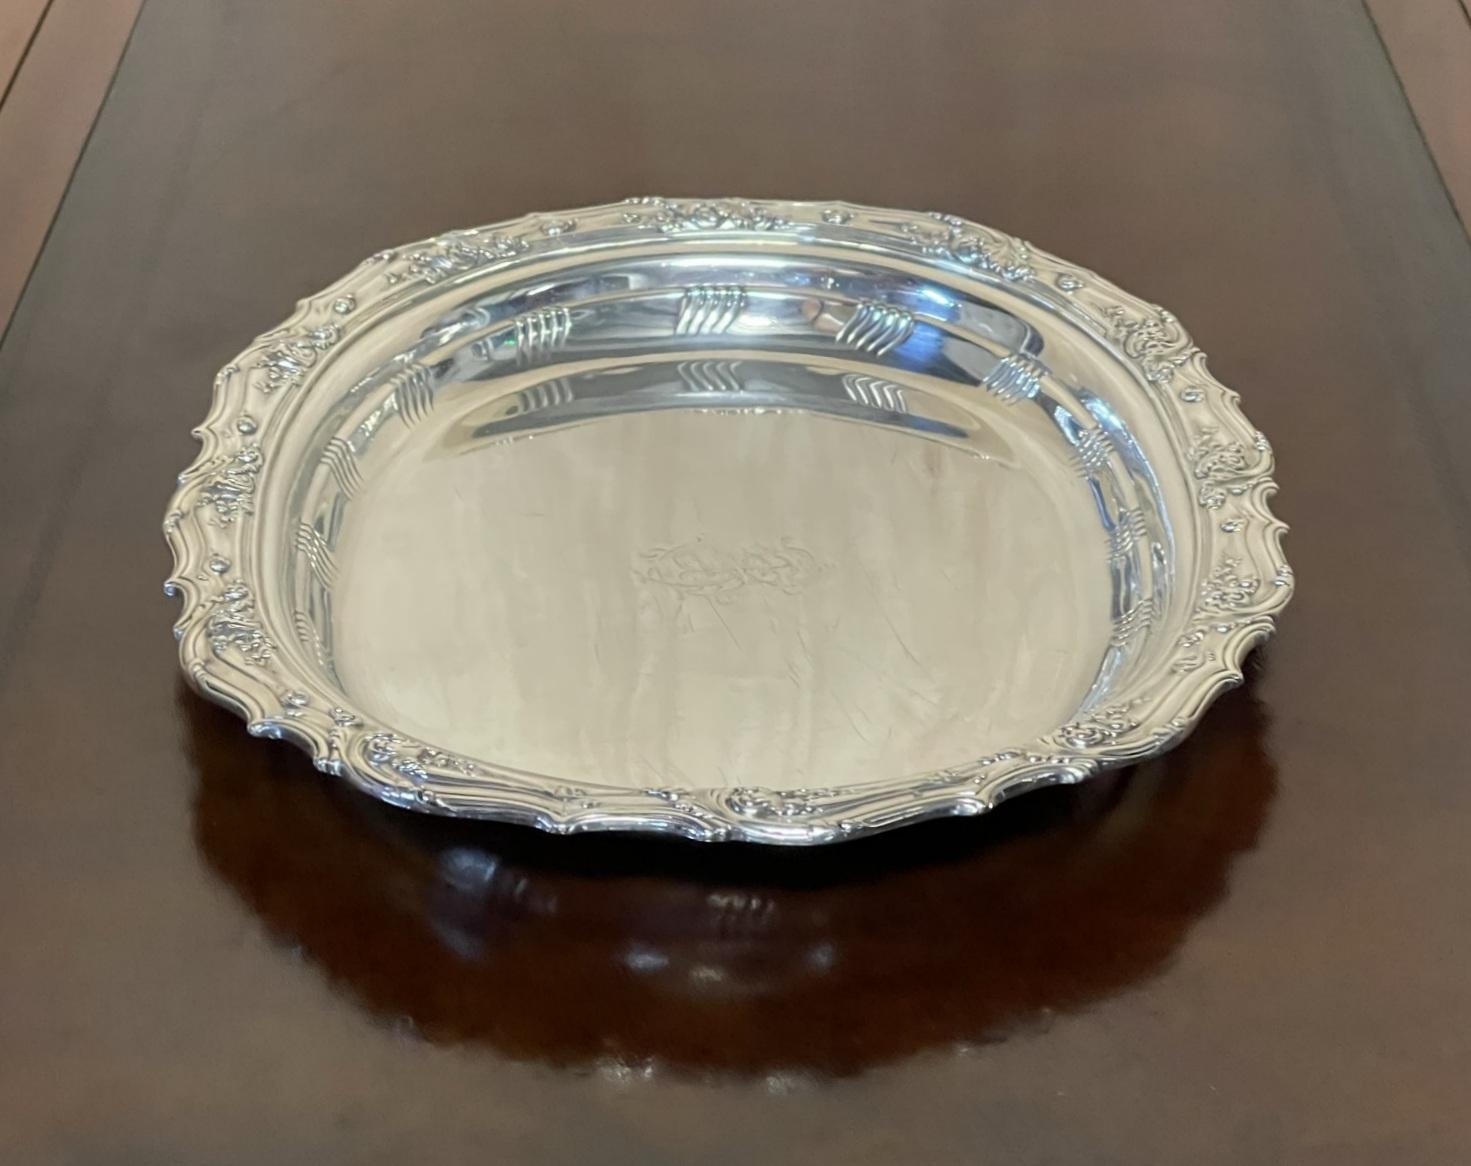 Super Collectable World Fair Chicago 1893 Antique Tiffany & Co. Sterling Tray For Sale 11